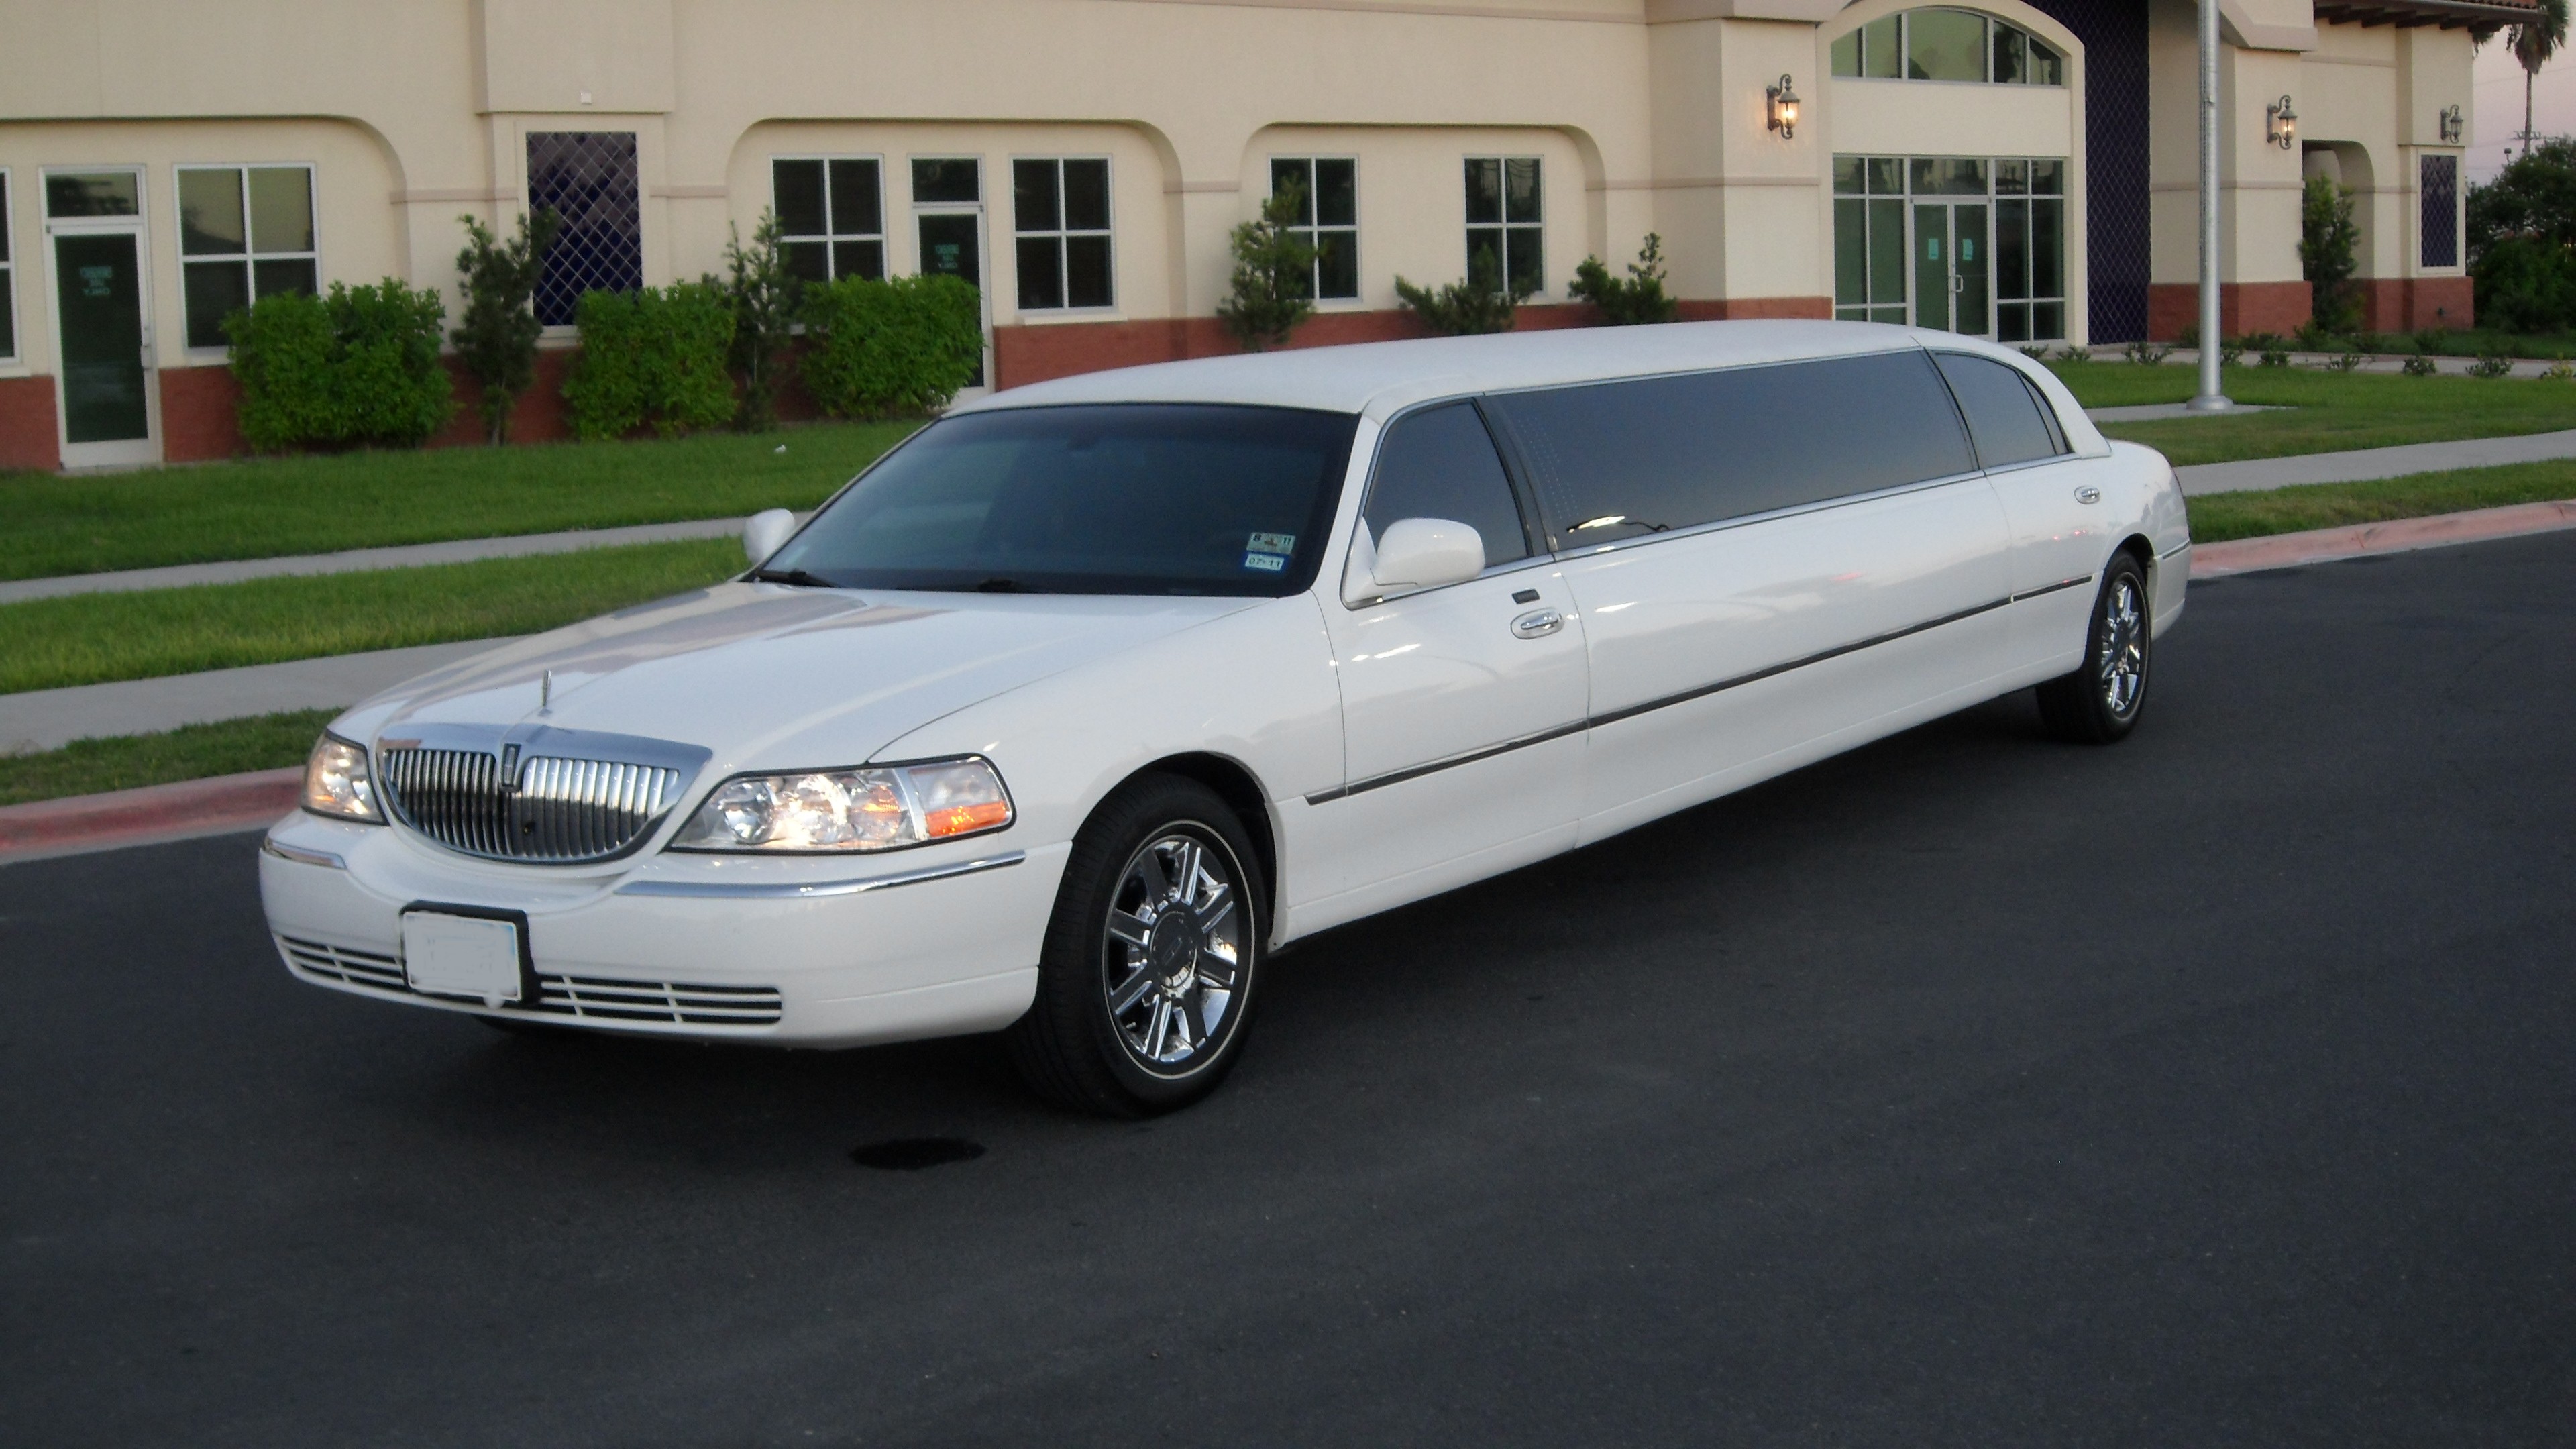 Image result for pictures of limos